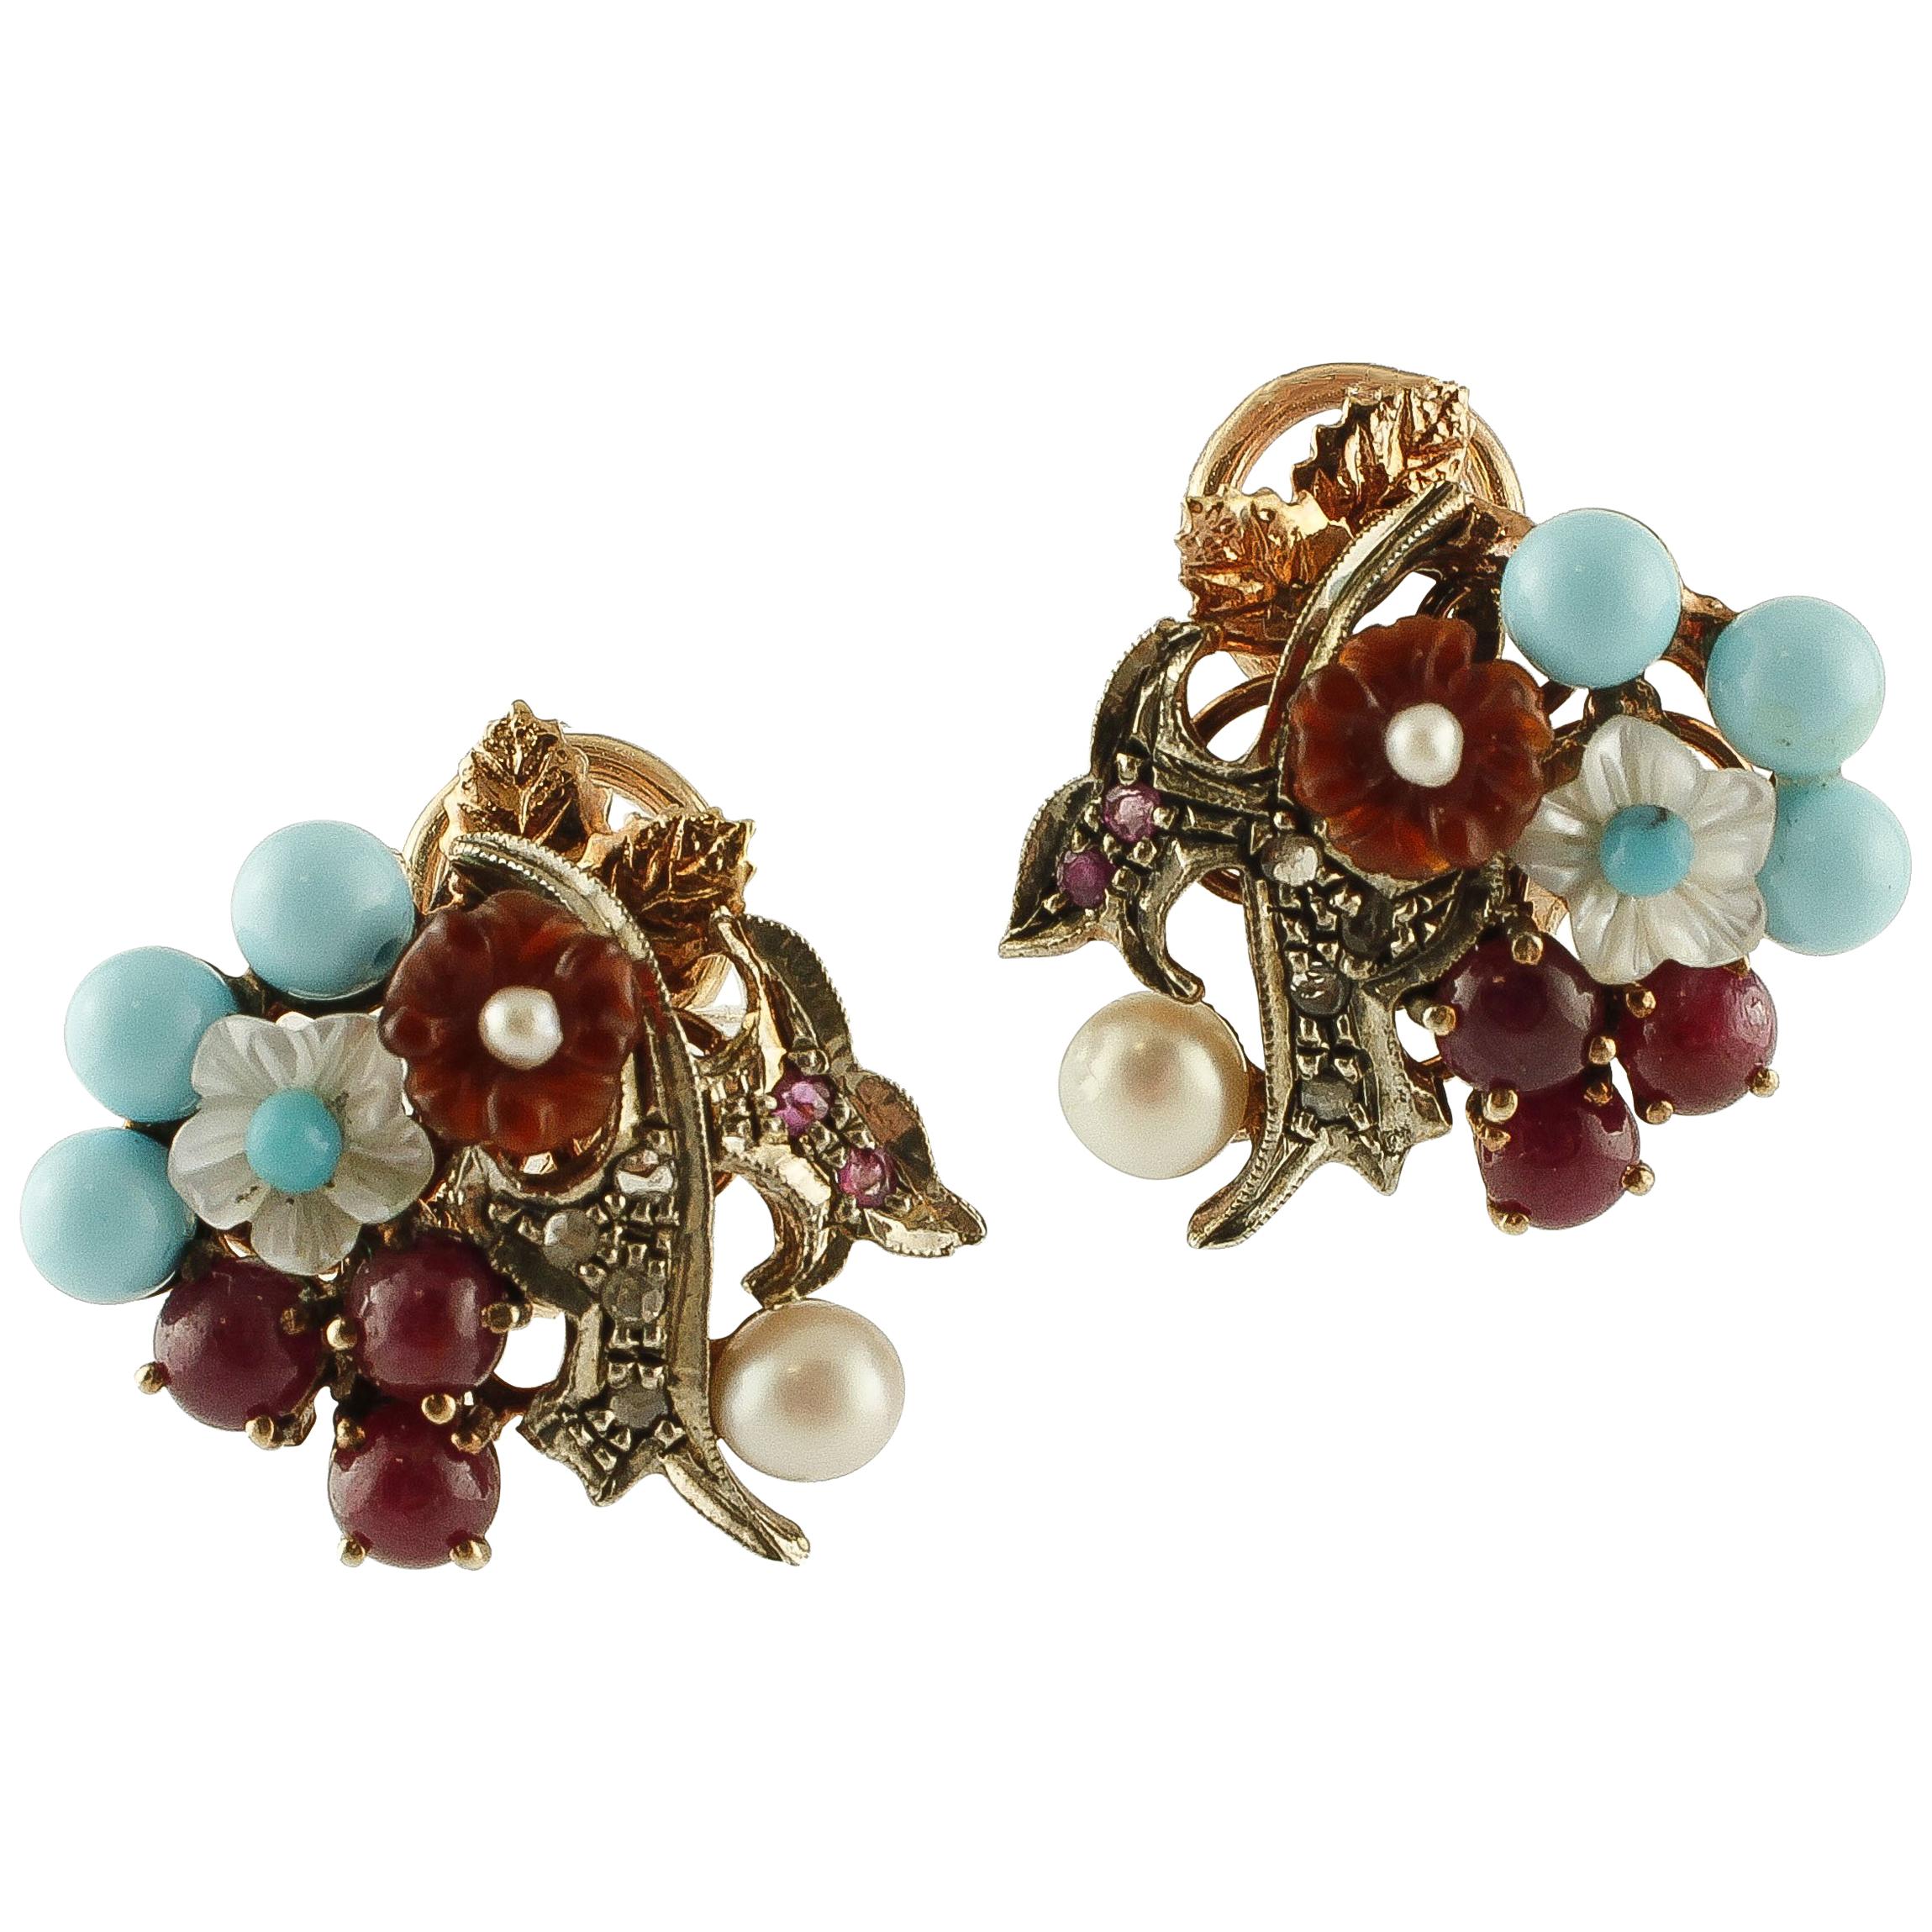 Diamonds, Rubies, Turquoise, Carnelian, Mother of Pearl Gold and Silver Earrings